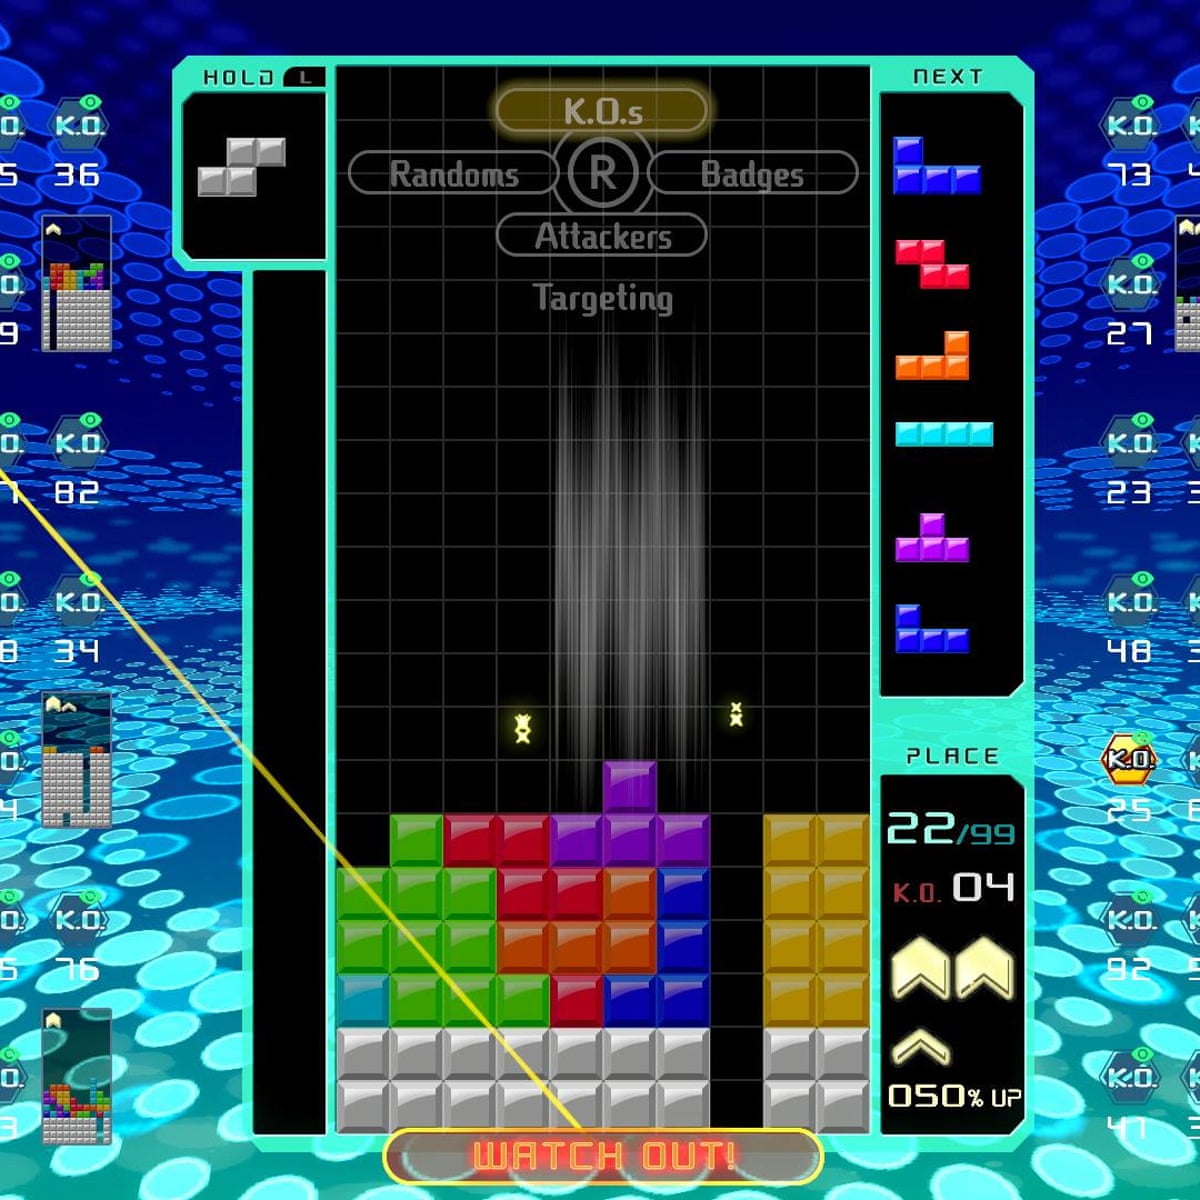 You can now play Tetris with Soviet-style housing blocks, News